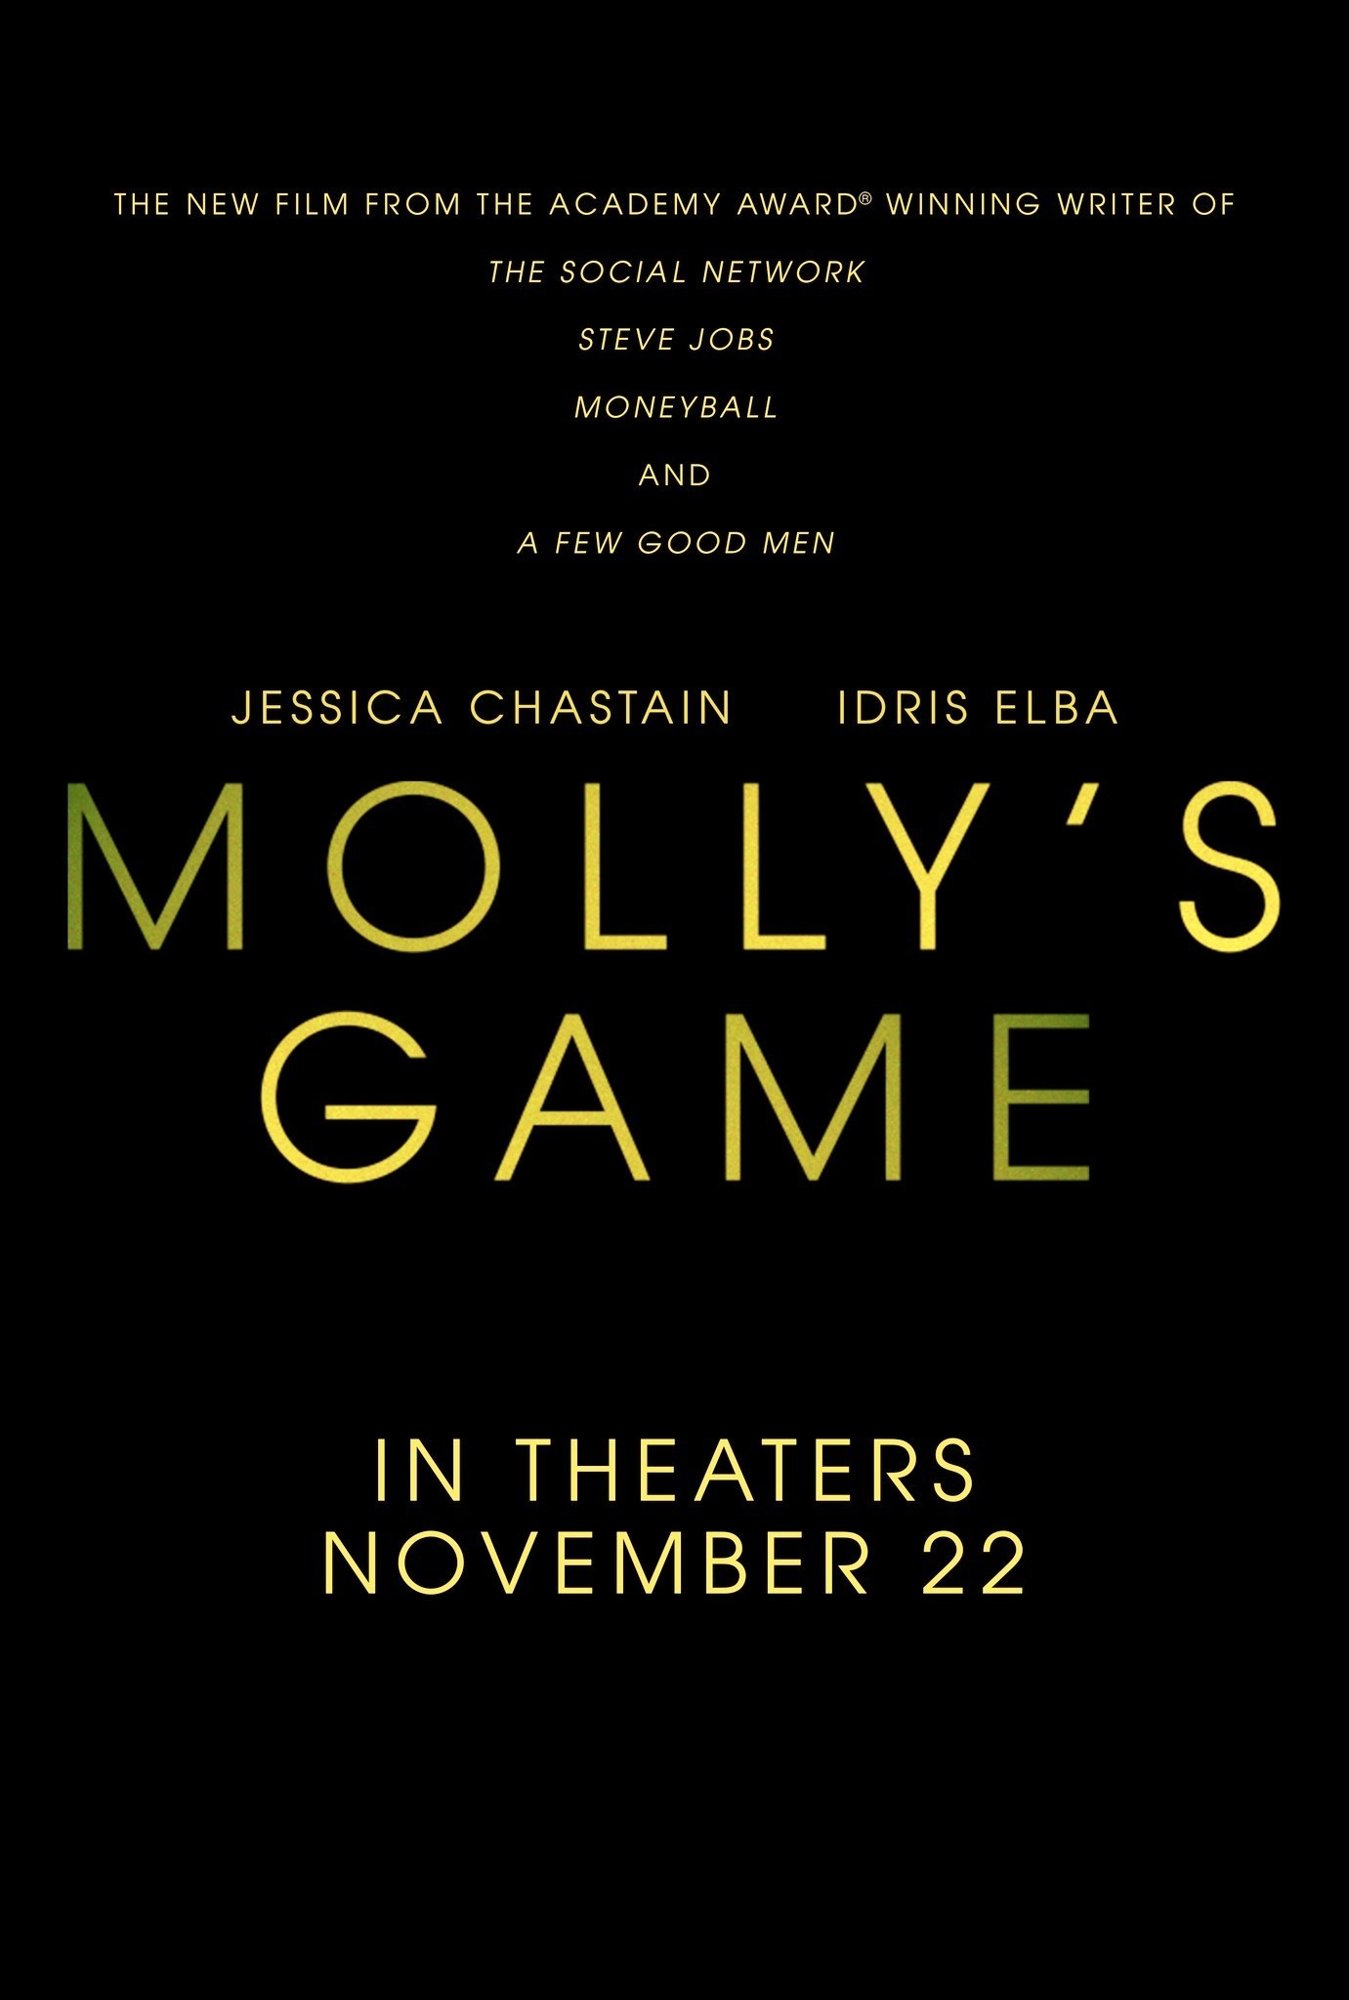 Poster of STX Entertainment's Molly's Game (2017)